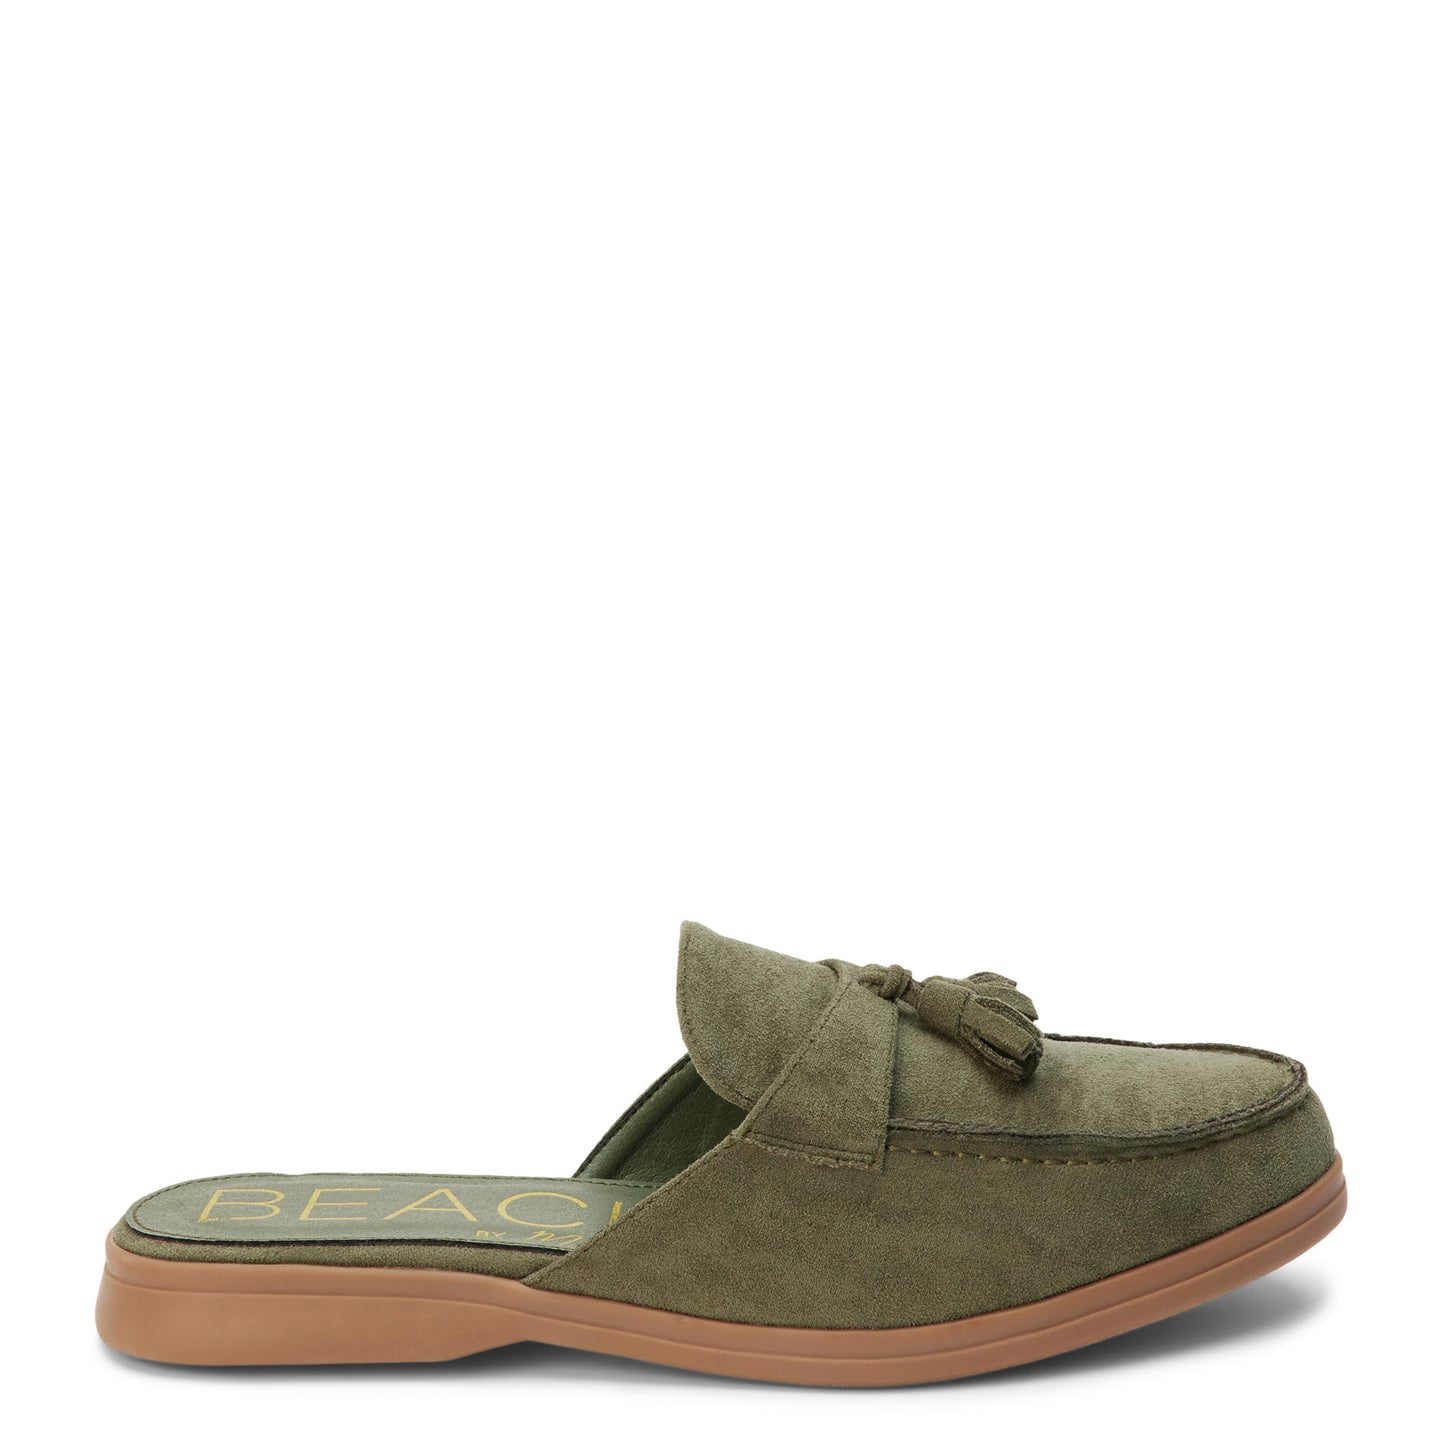 Peltz Shoes  Women's Matisse Tyra Mule OLIVE TYRA OLIVE